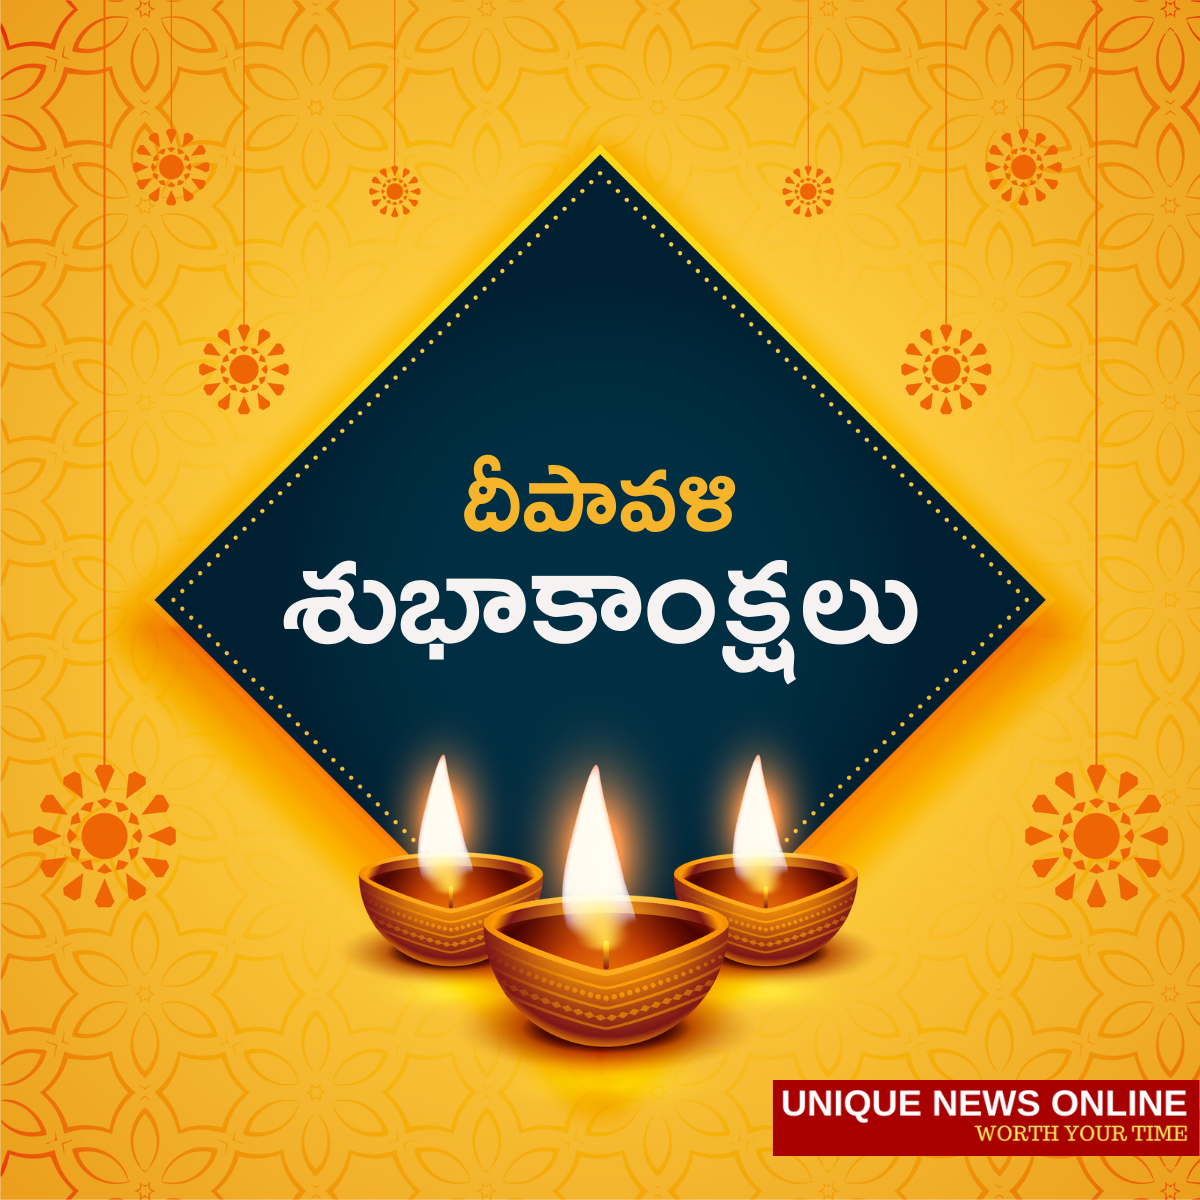 Happy Deepavali 2022 Telugu and Kannada Greetings, SMS, Wishes, Messages, Quotes, Posters, Banners, and HD Images for Parents